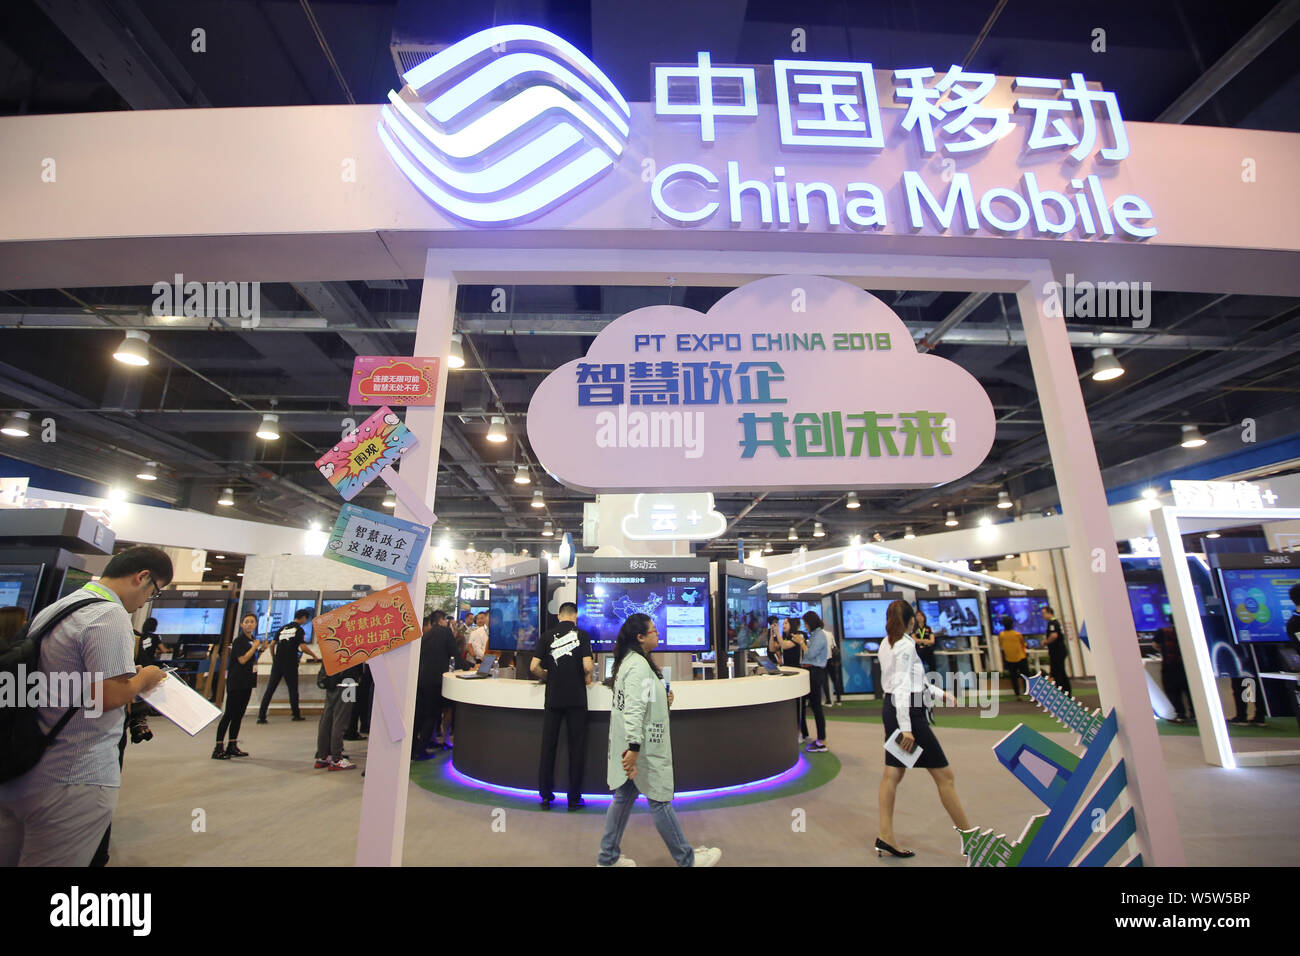 file-people-visit-the-stand-of-china-mobile-during-an-expo-in-beijing-china-26-september